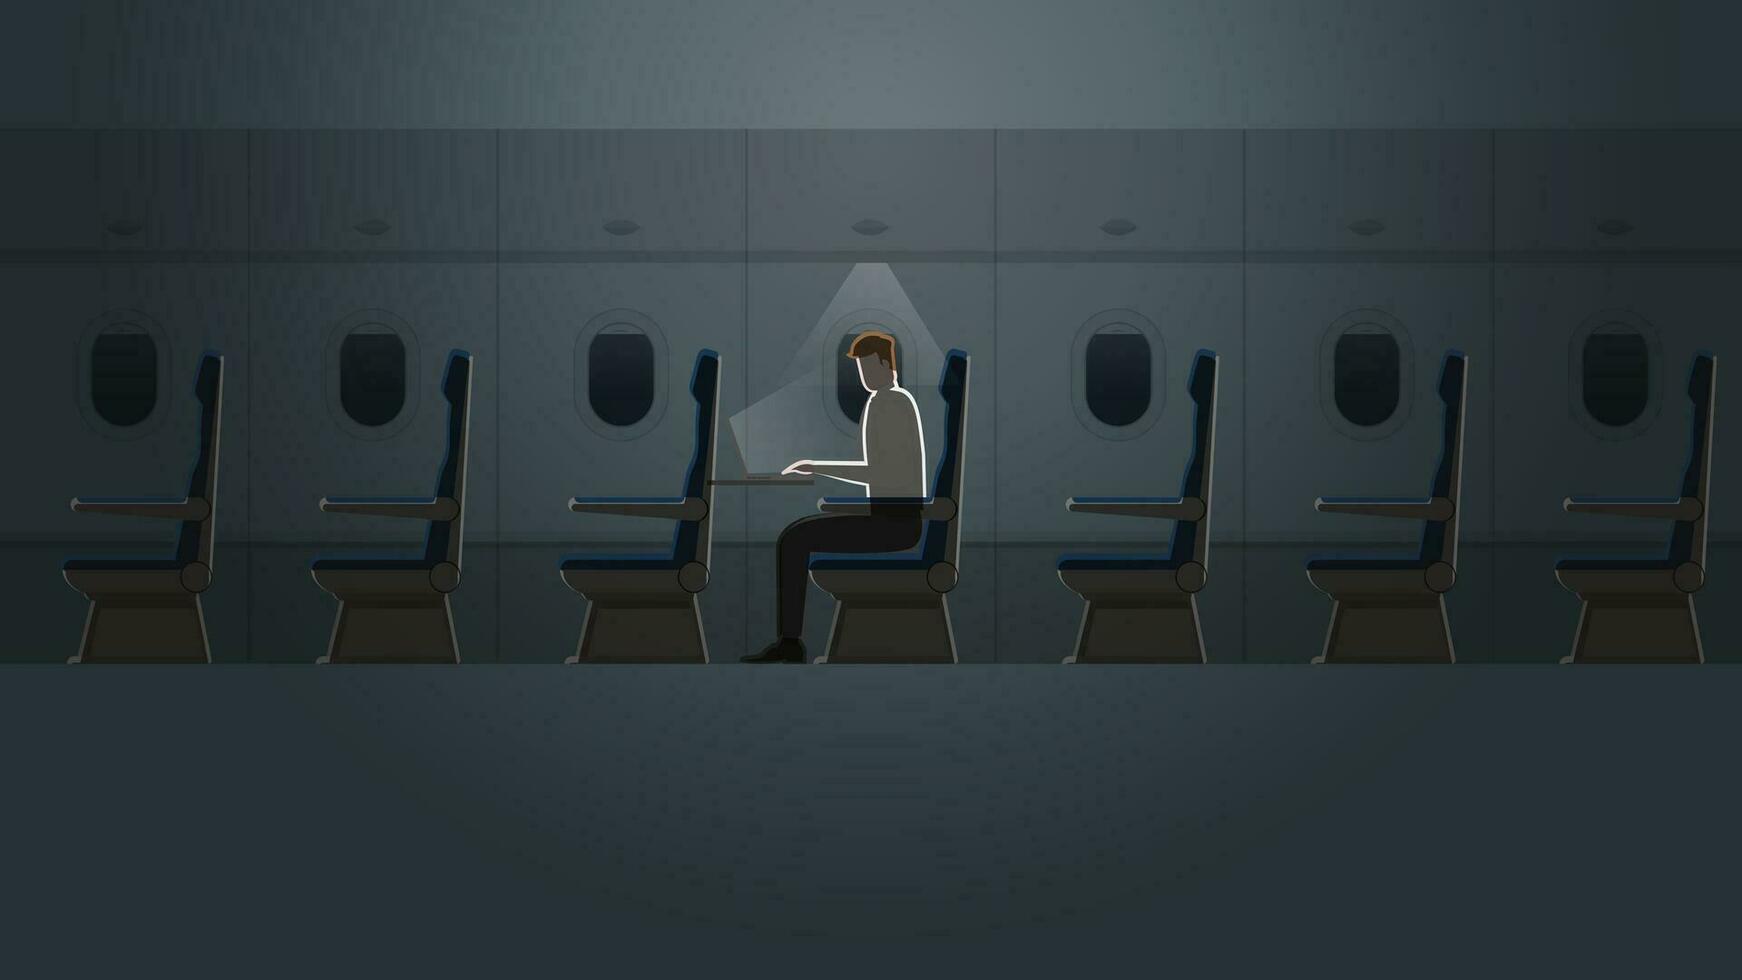 Employee salaryman working with laptop notebook in a plane cabin alone in the dark vector